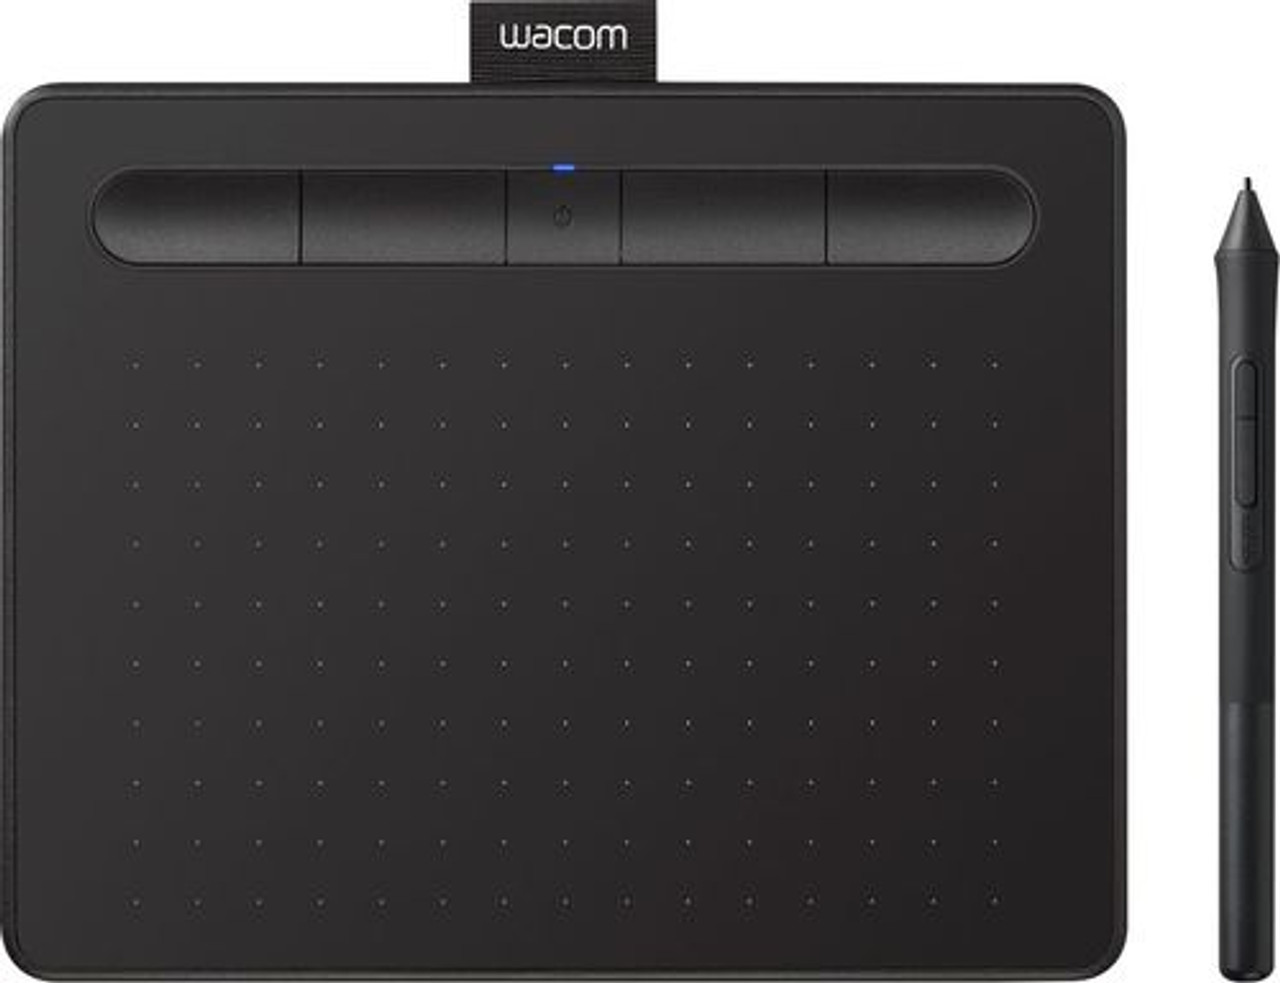 Wacom - Intuos Wireless Graphic Tablet (Small) with 3 Bonus Software included - Black